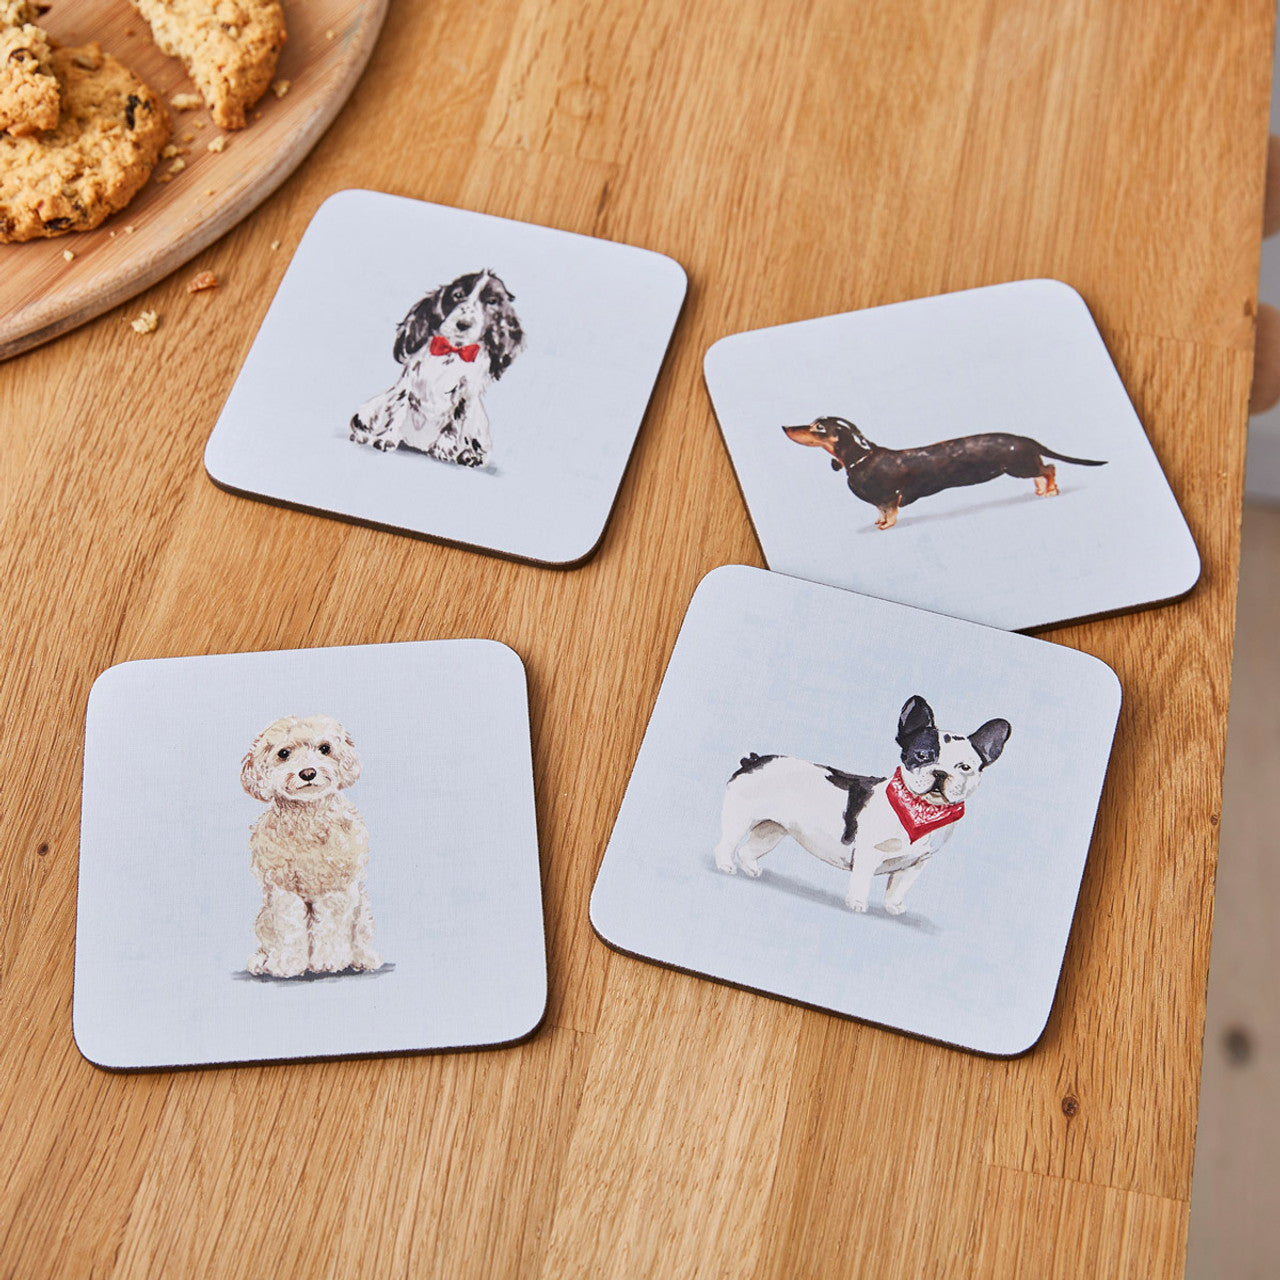 Curious Dogs Cork Backed Coasters Set of 4